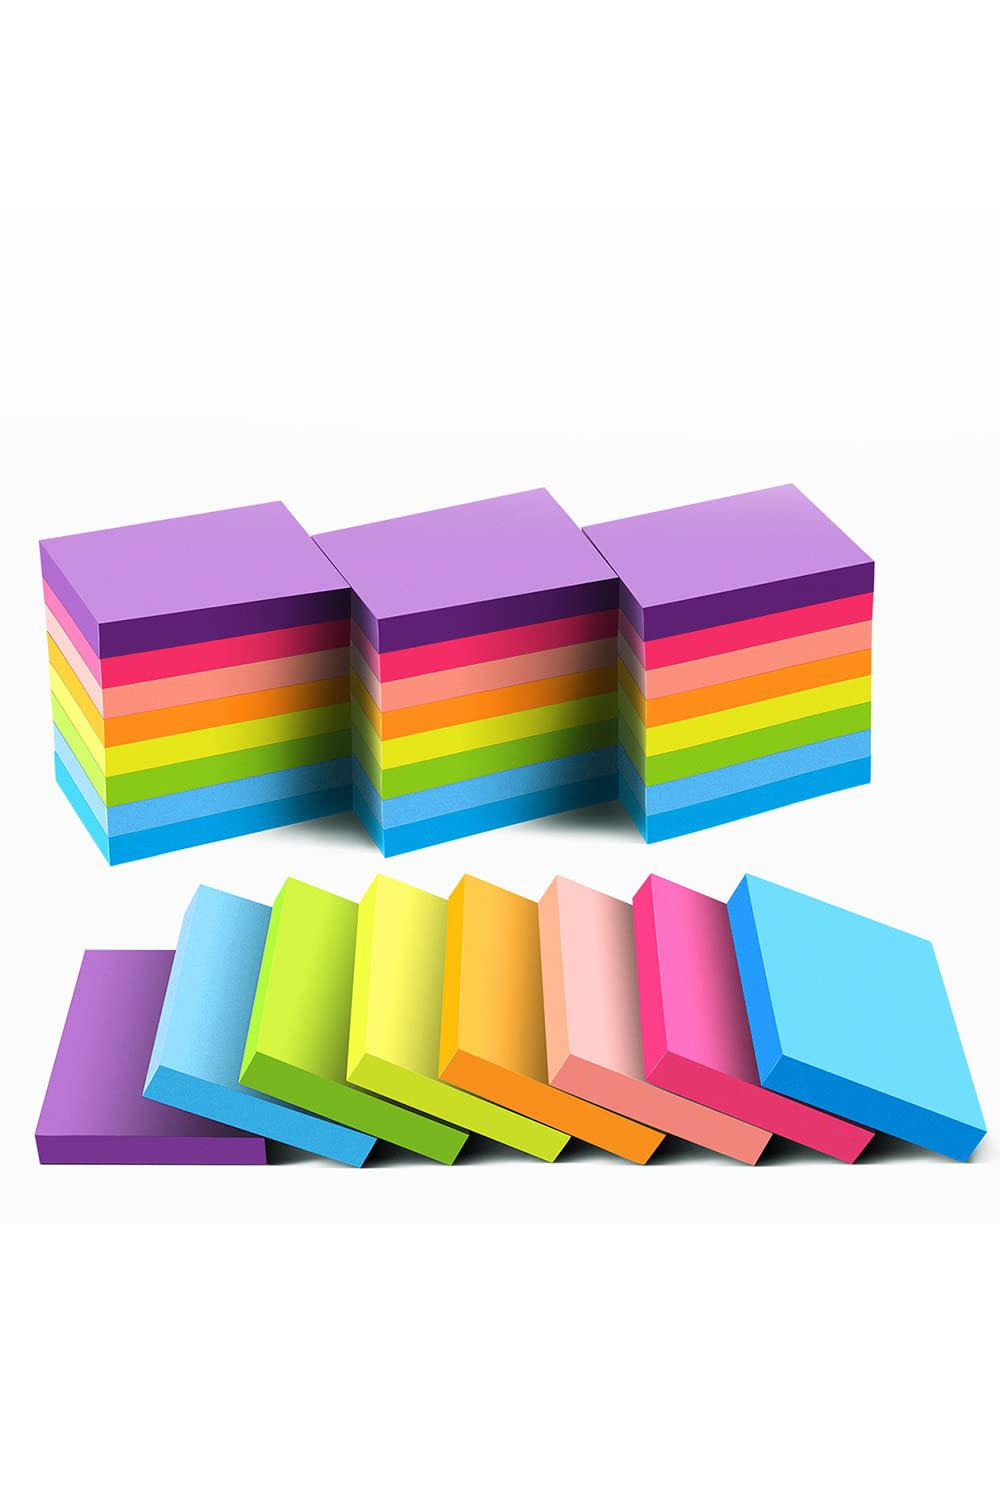 Vanpad sticky notes 1.5x2 inches, bright colors self-stick pads, 24 pack, 75 sheets/pad